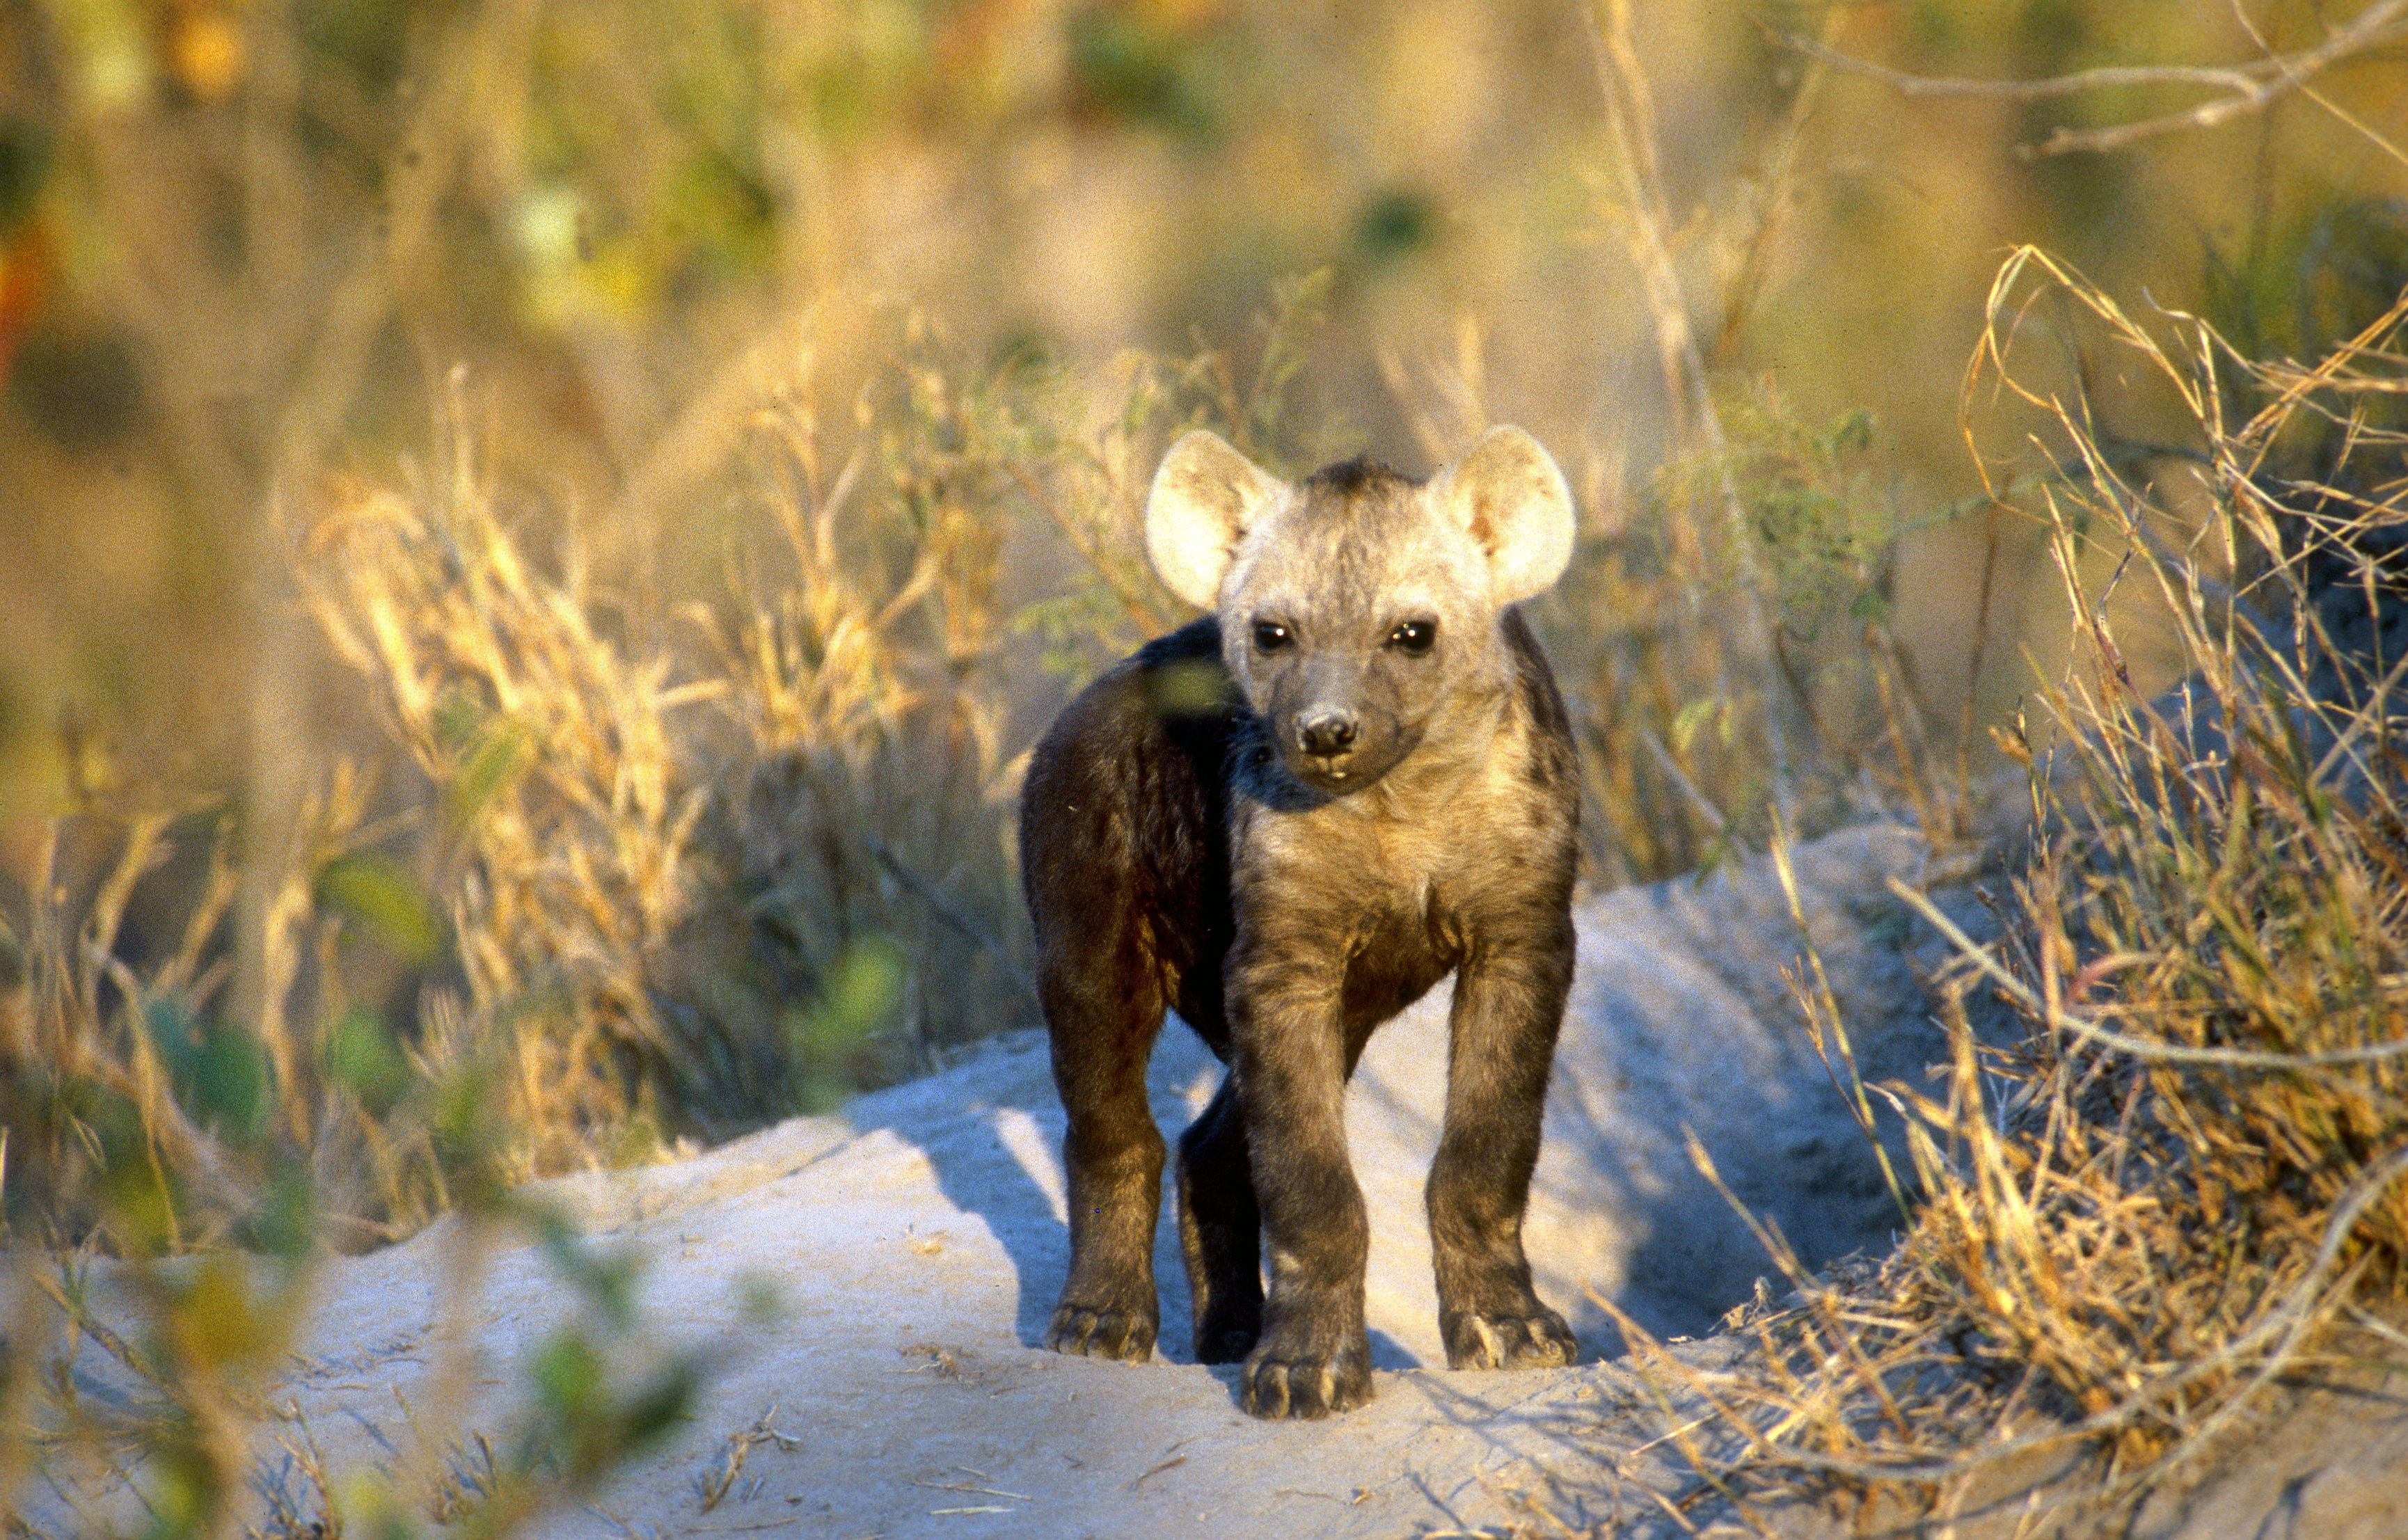 Image of Spotted Hyena